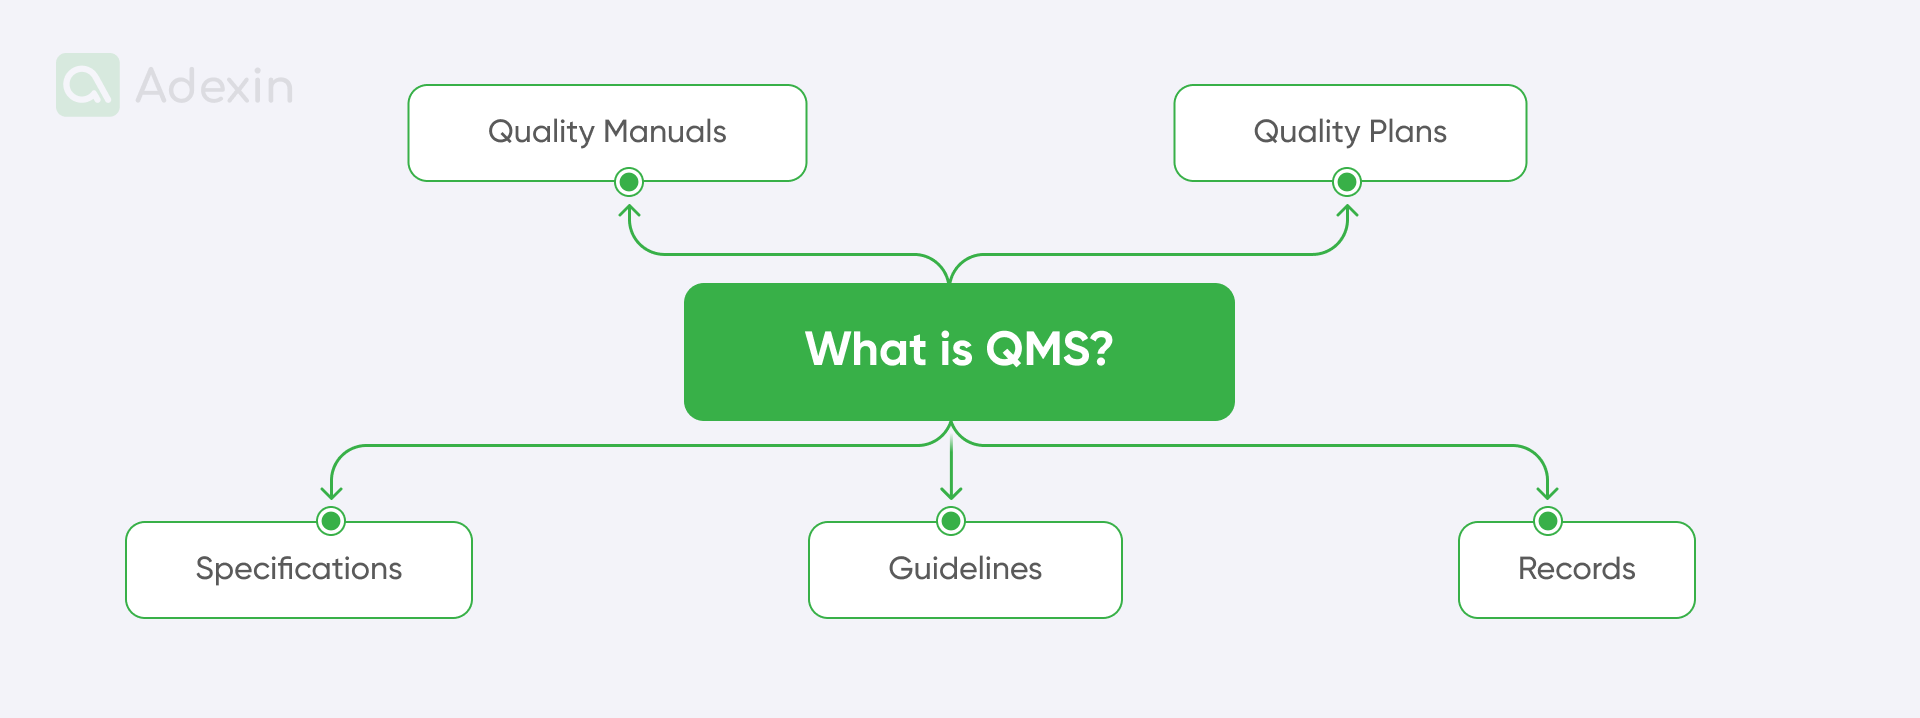 The types of documents used in the QMS